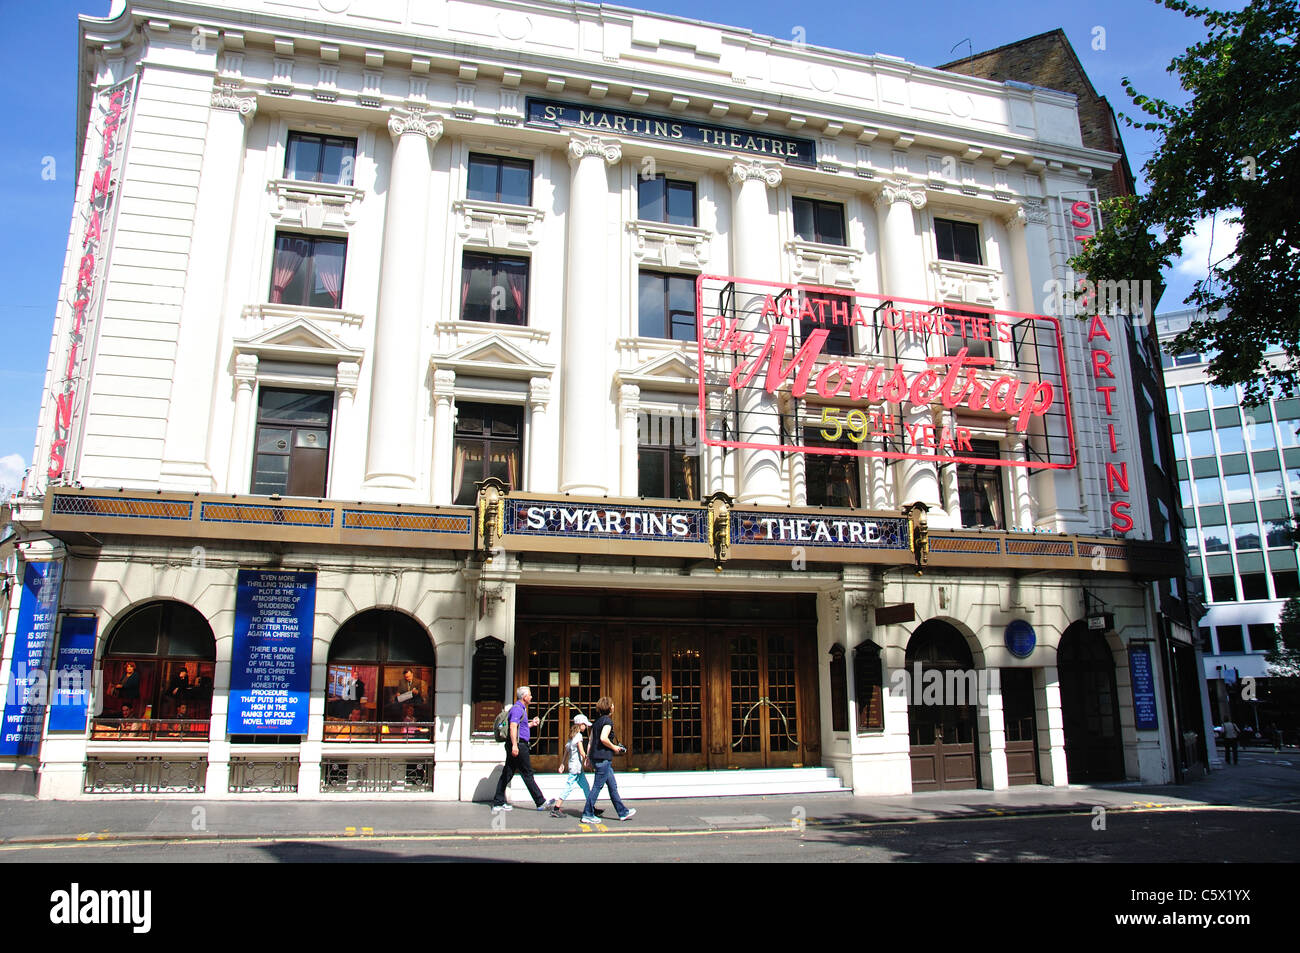 Agatha Christie's 'The Mousetrap' play, St.Martin's Theatre, West Street, Cambridge Circus, London, England, United Kingdom Stock Photo